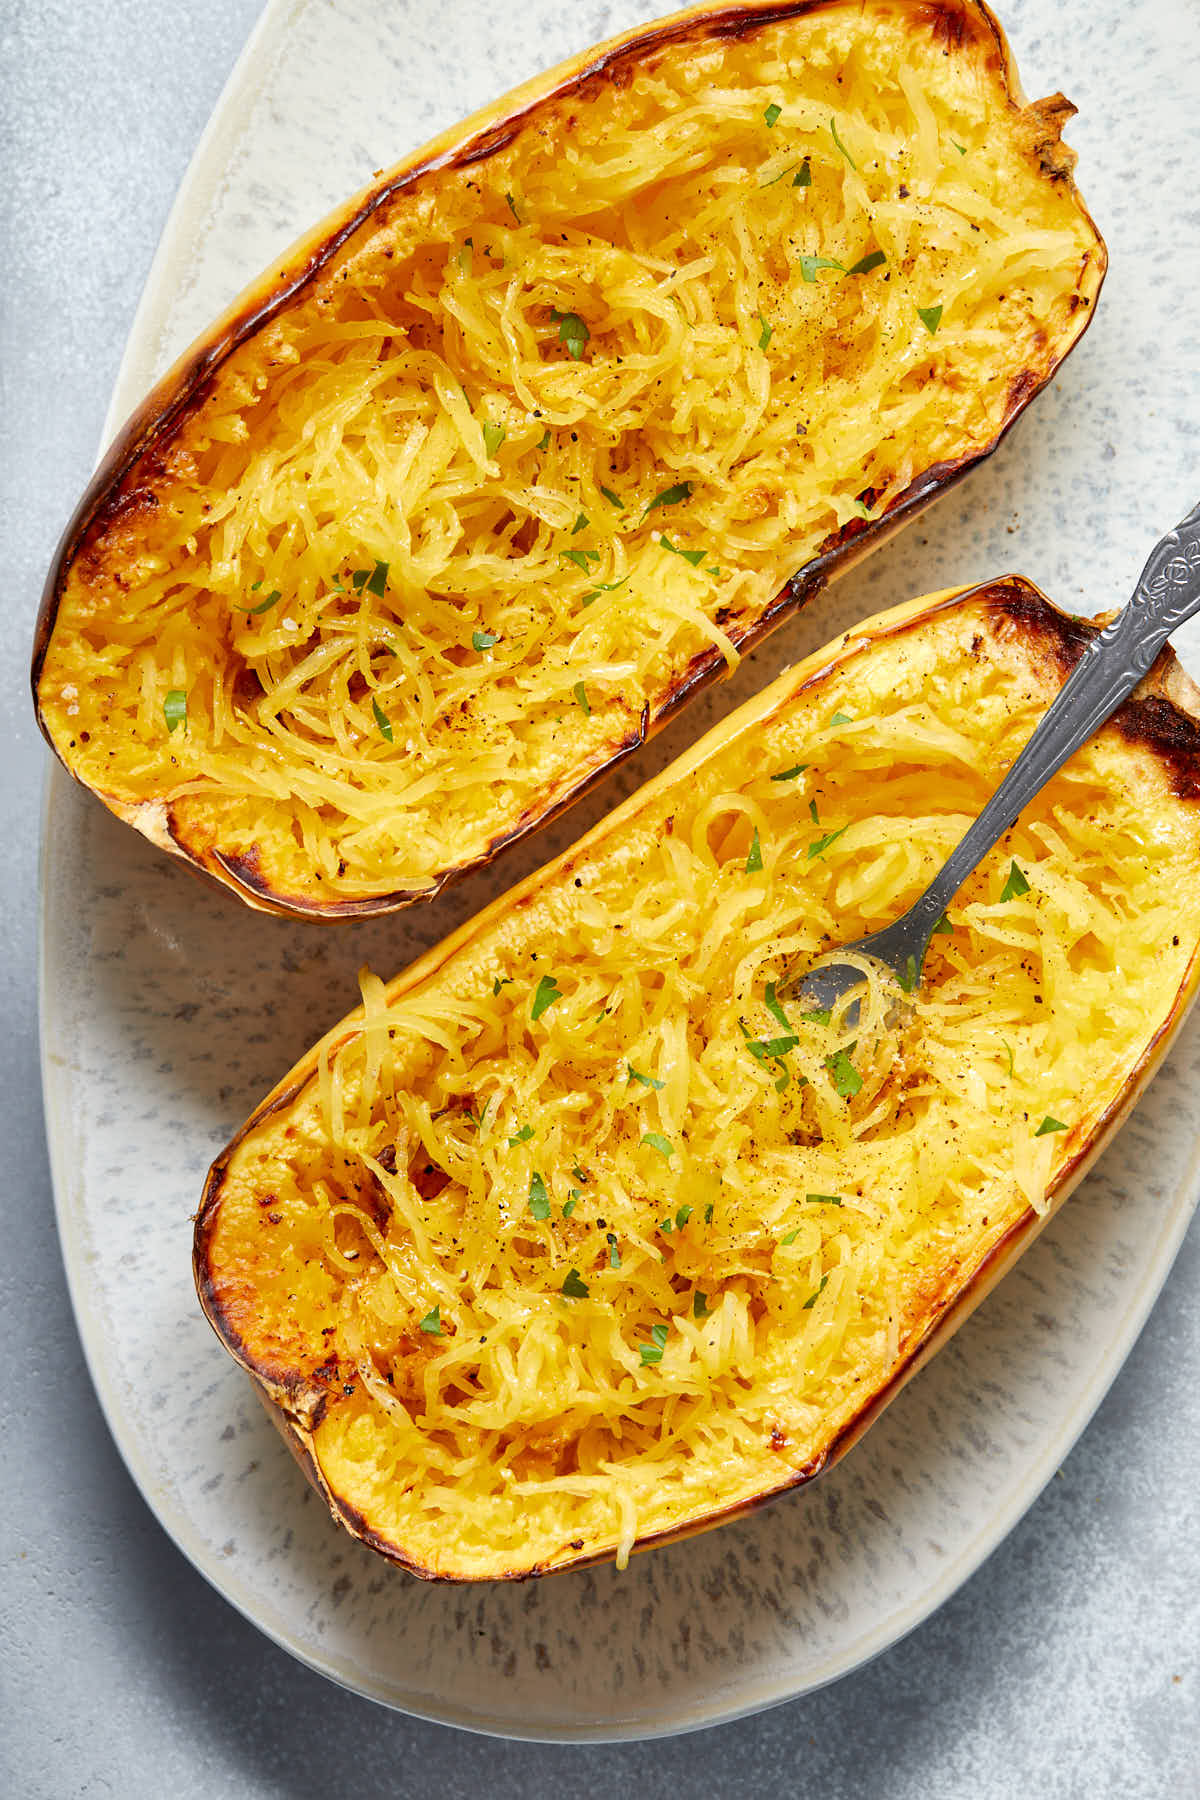 Up close view of two roasted spaghetti squash halves on a platter with some noodles twirled around a fork.